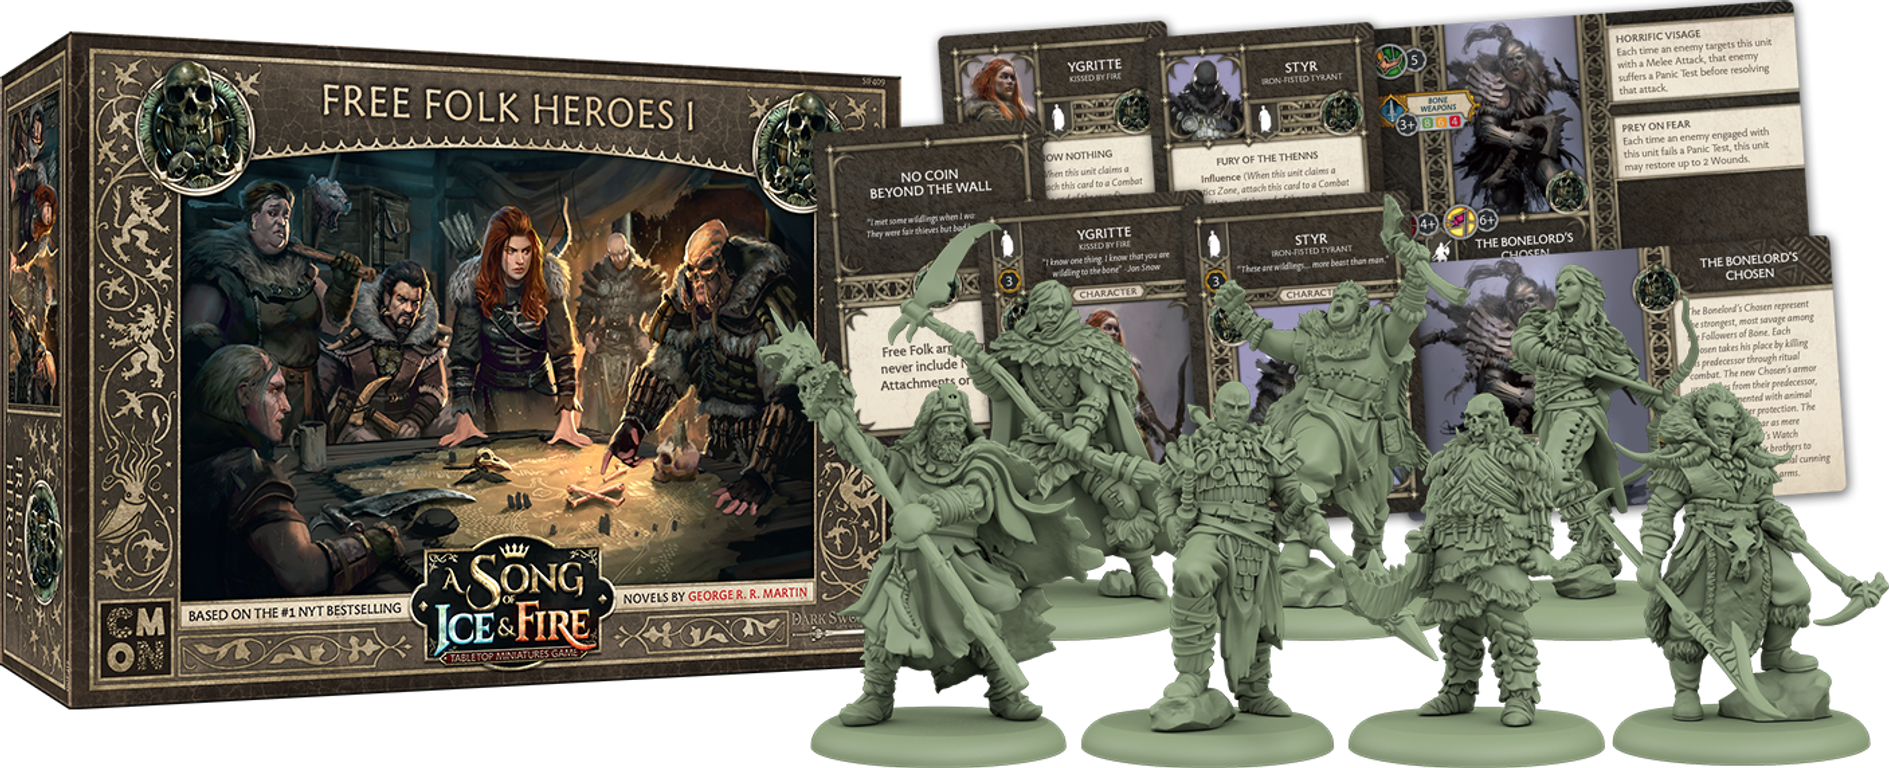 A Song of Ice & Fire: Tabletop Miniatures Game – Free Folk Heroes I components